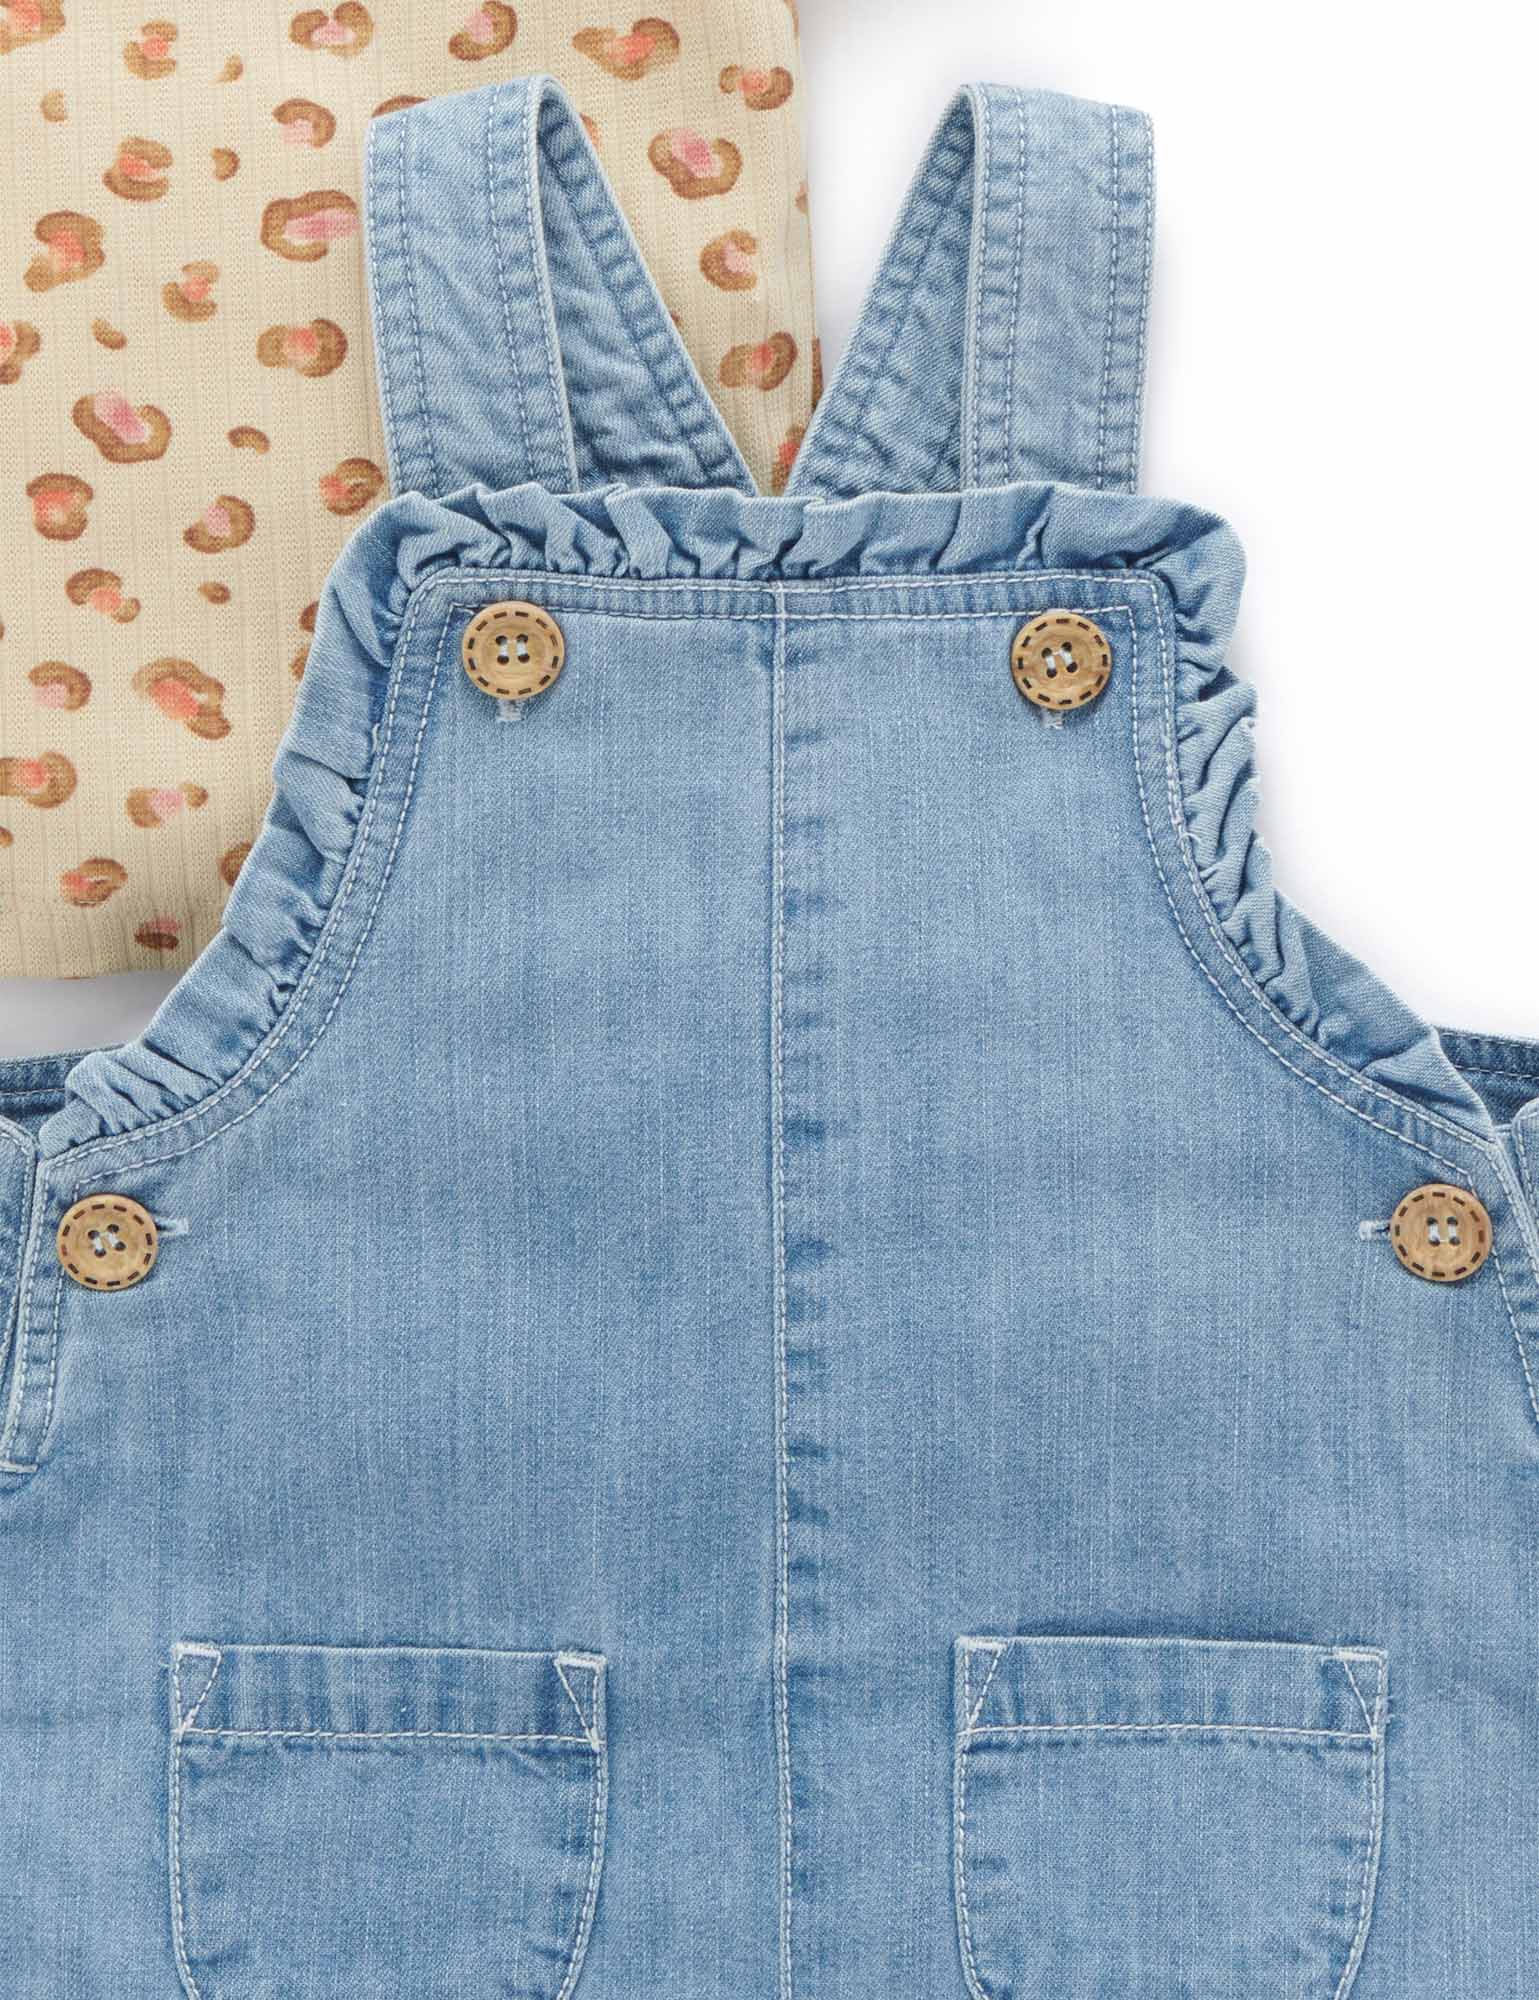 Baby Jeans Overalls Toddler Soft Cute Jumpsuit – Kidscool Space